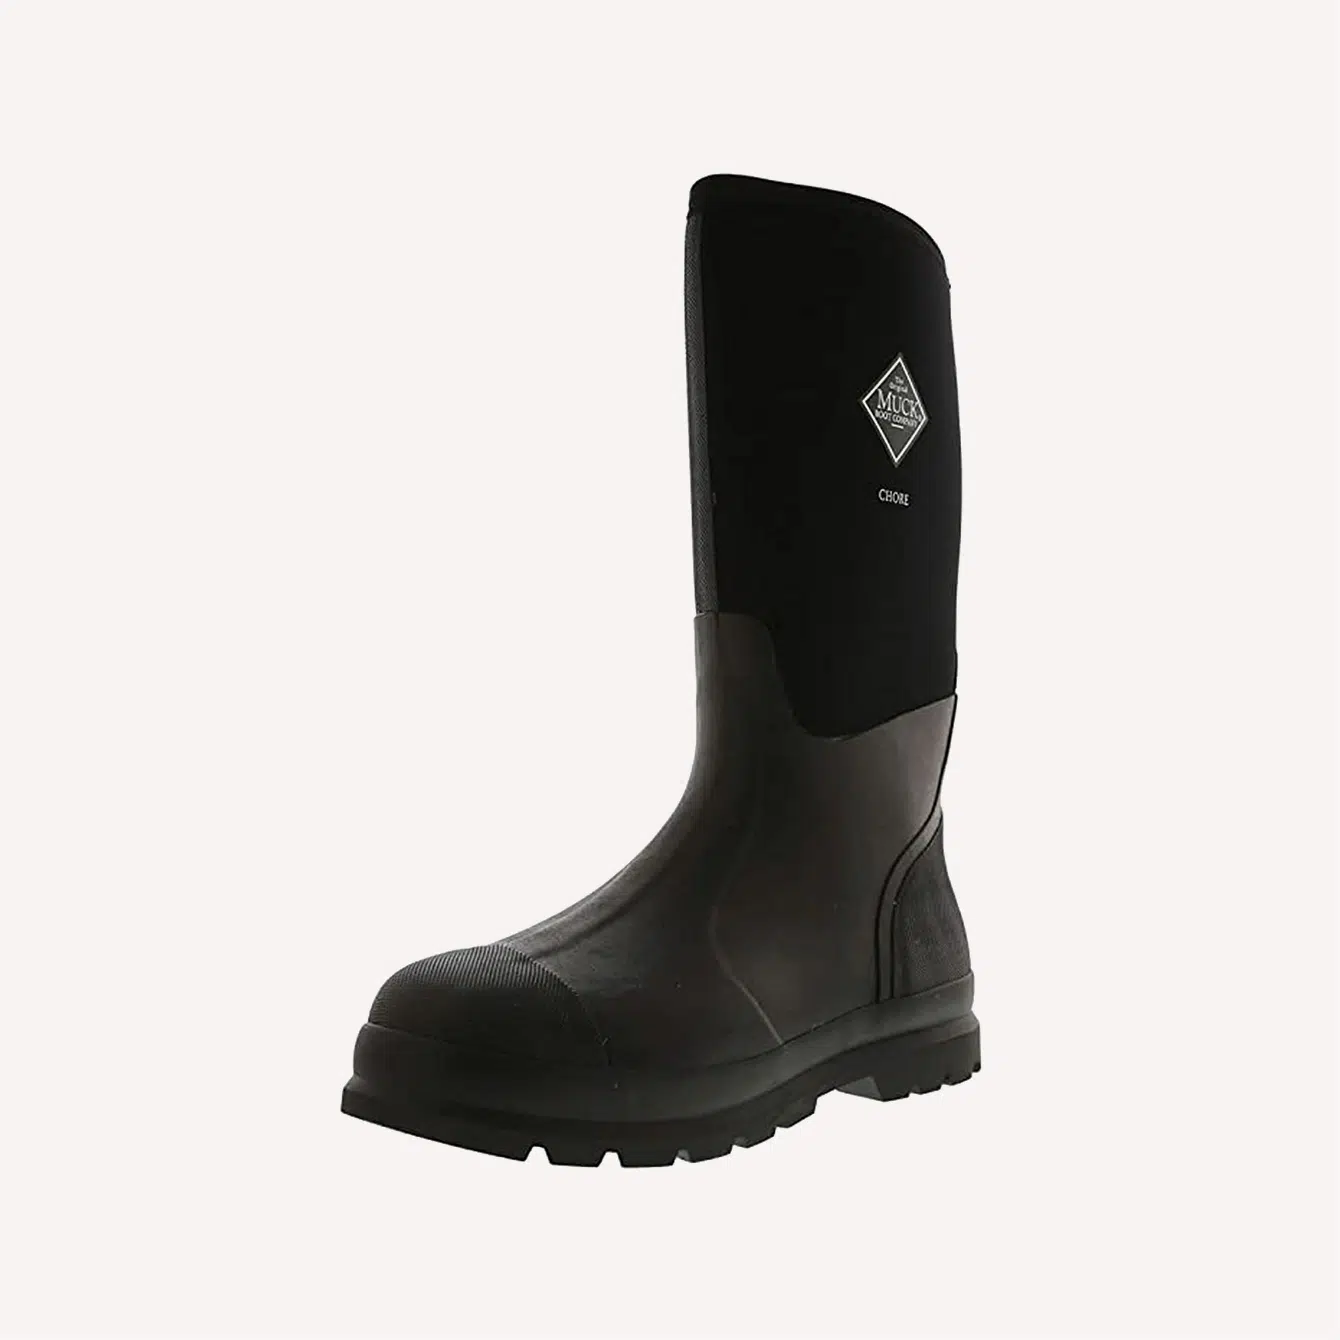 Muck Boot Mens Chore Classic Rubber Work Boots